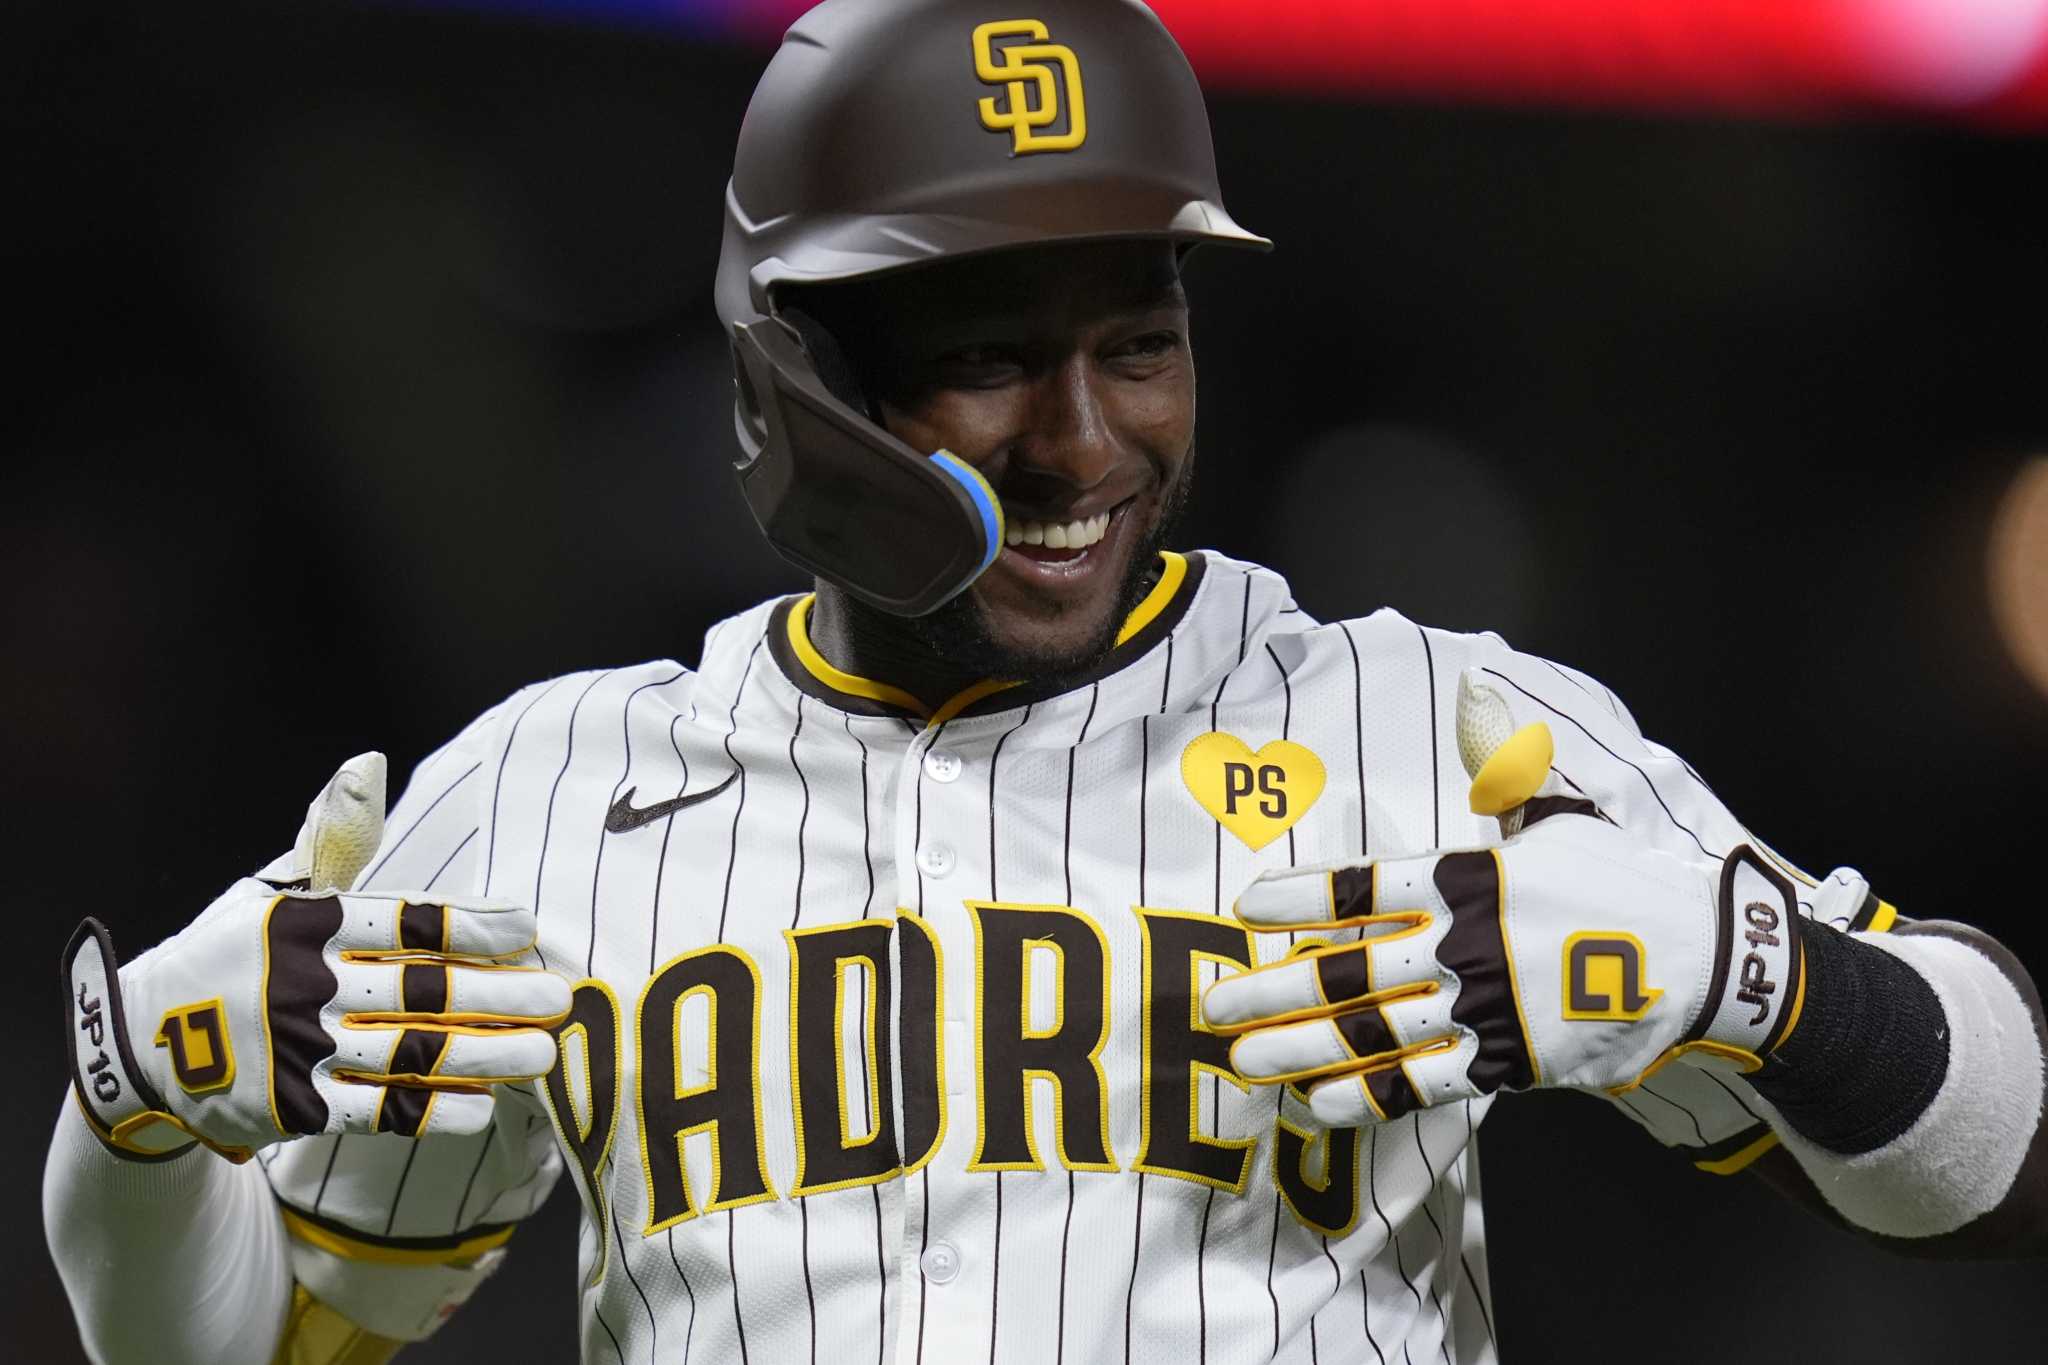 The first All-Star nomination for Padres' Profar has a Texan flair, 12 years after his debut with the Rangers